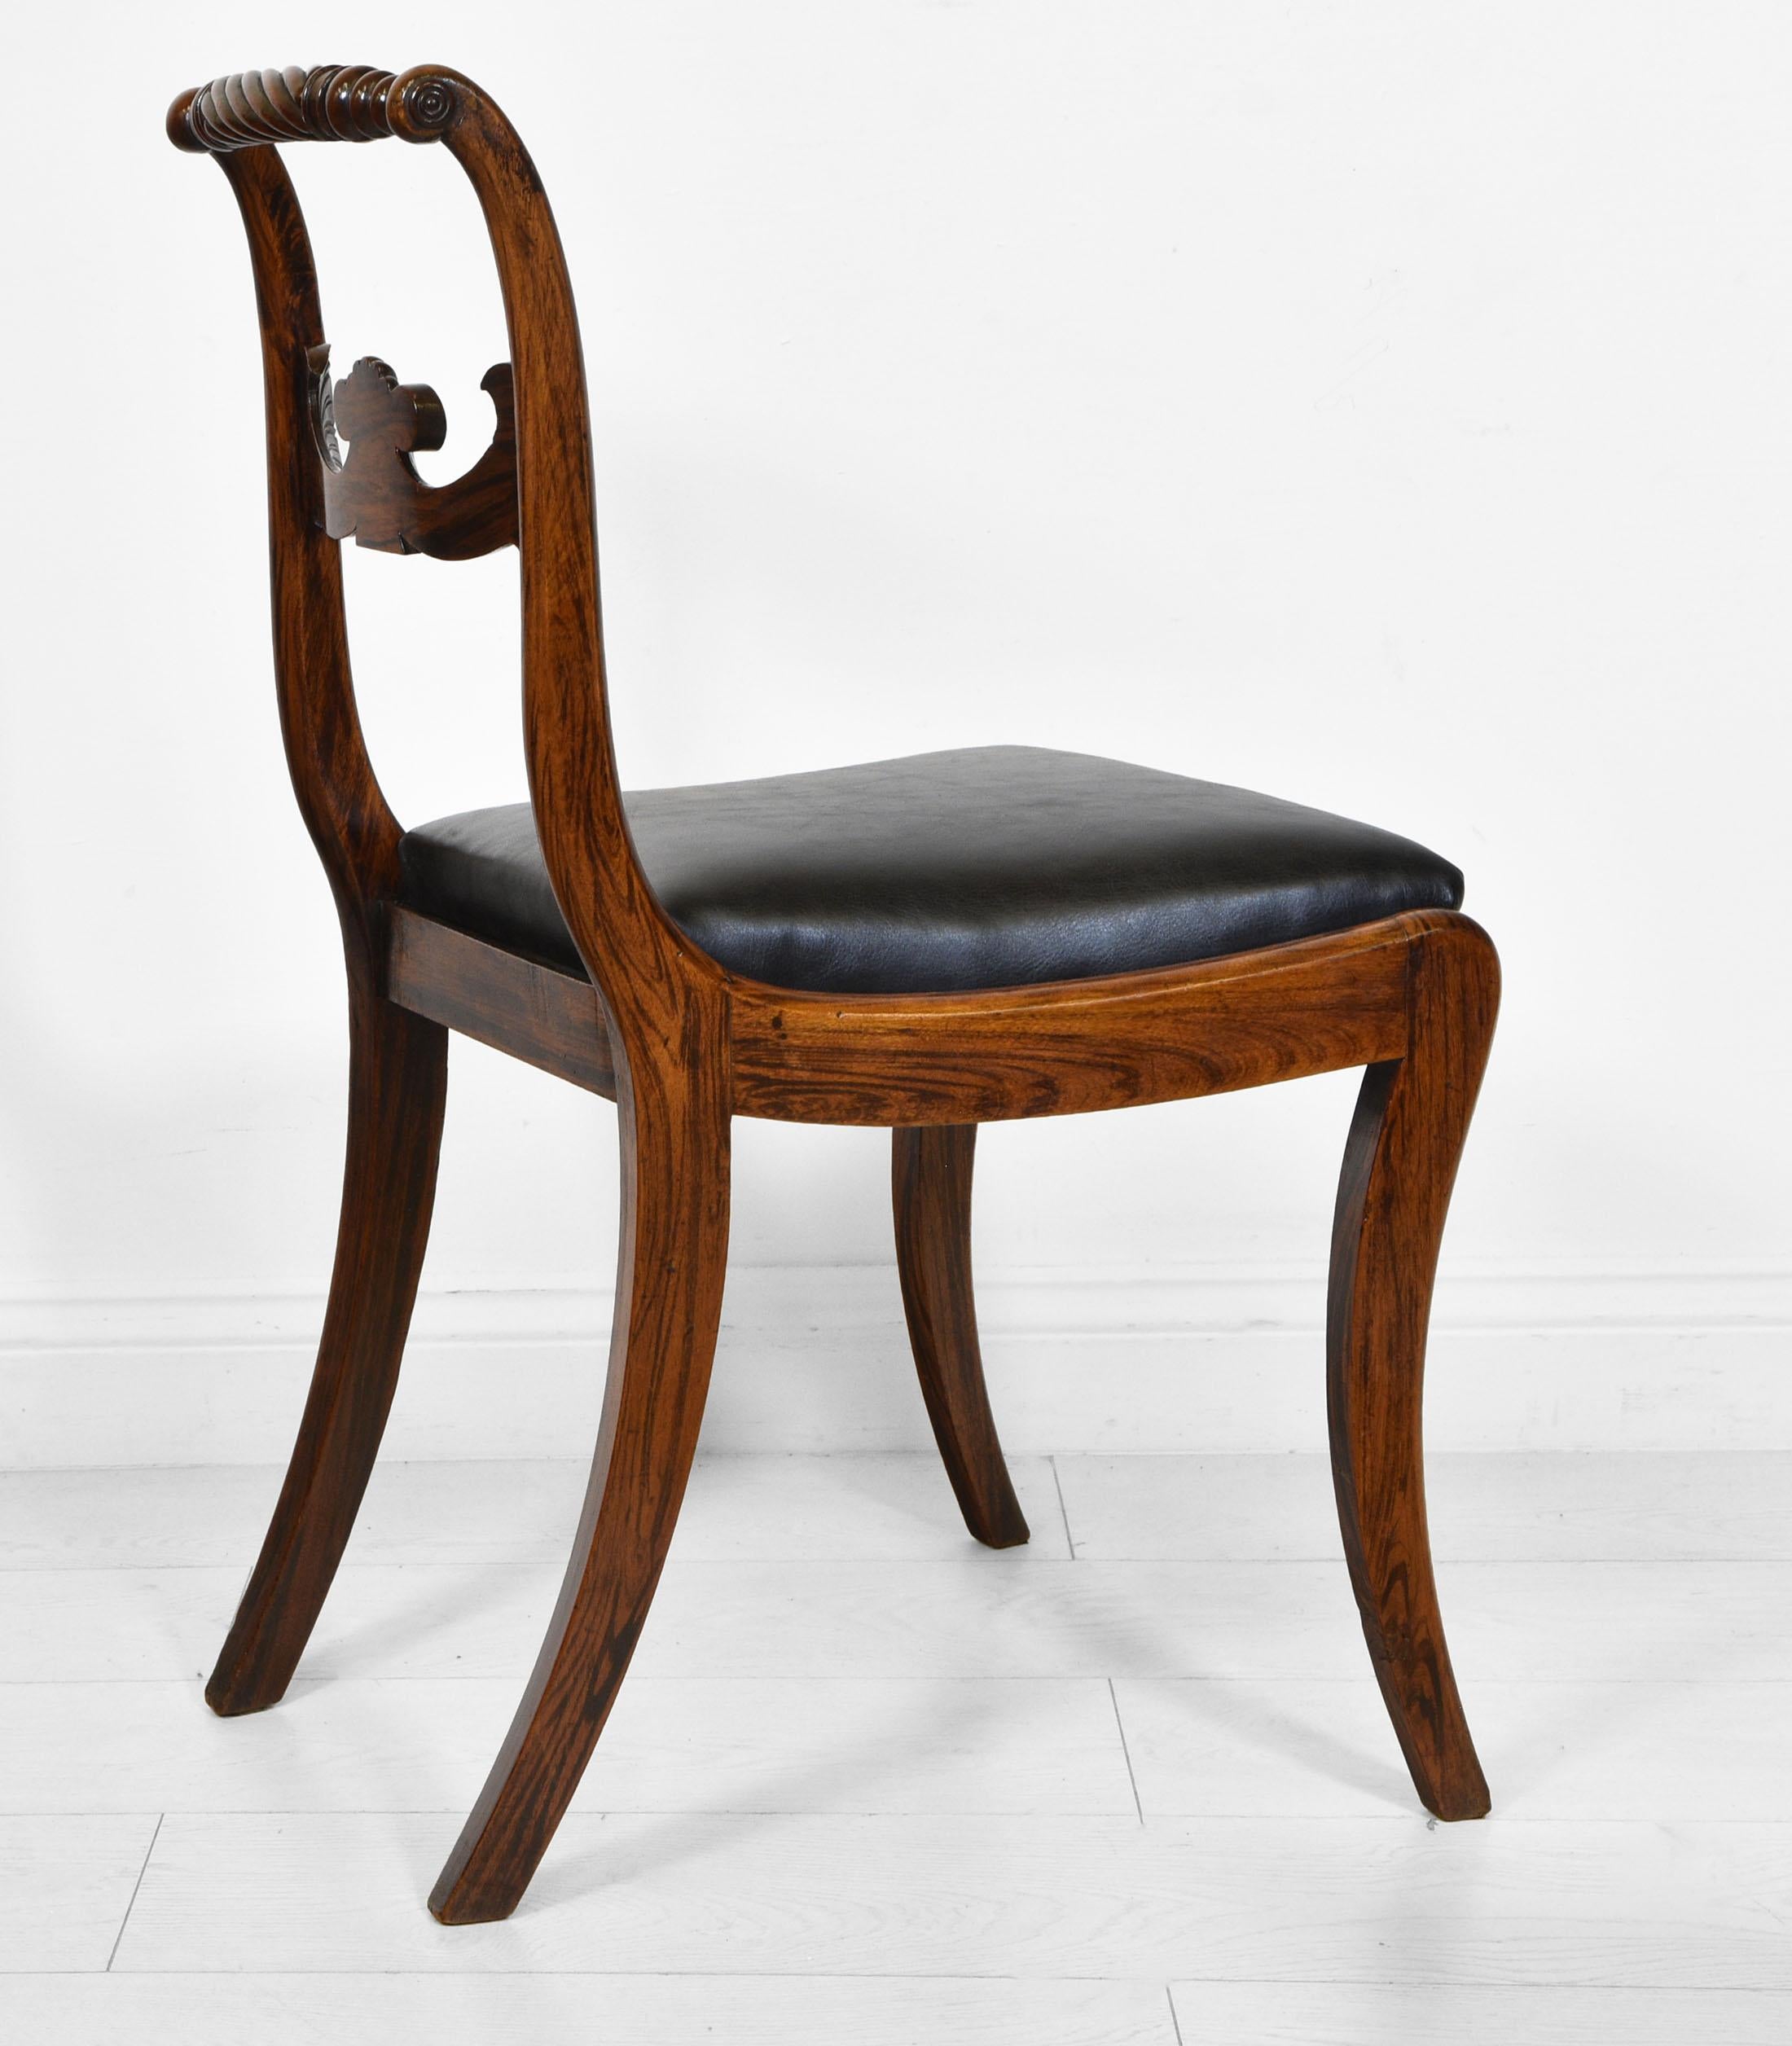 19th Century Pair Regency Simulated Rosewood & Leather Trafalgar Chairs, Circa 1820 For Sale